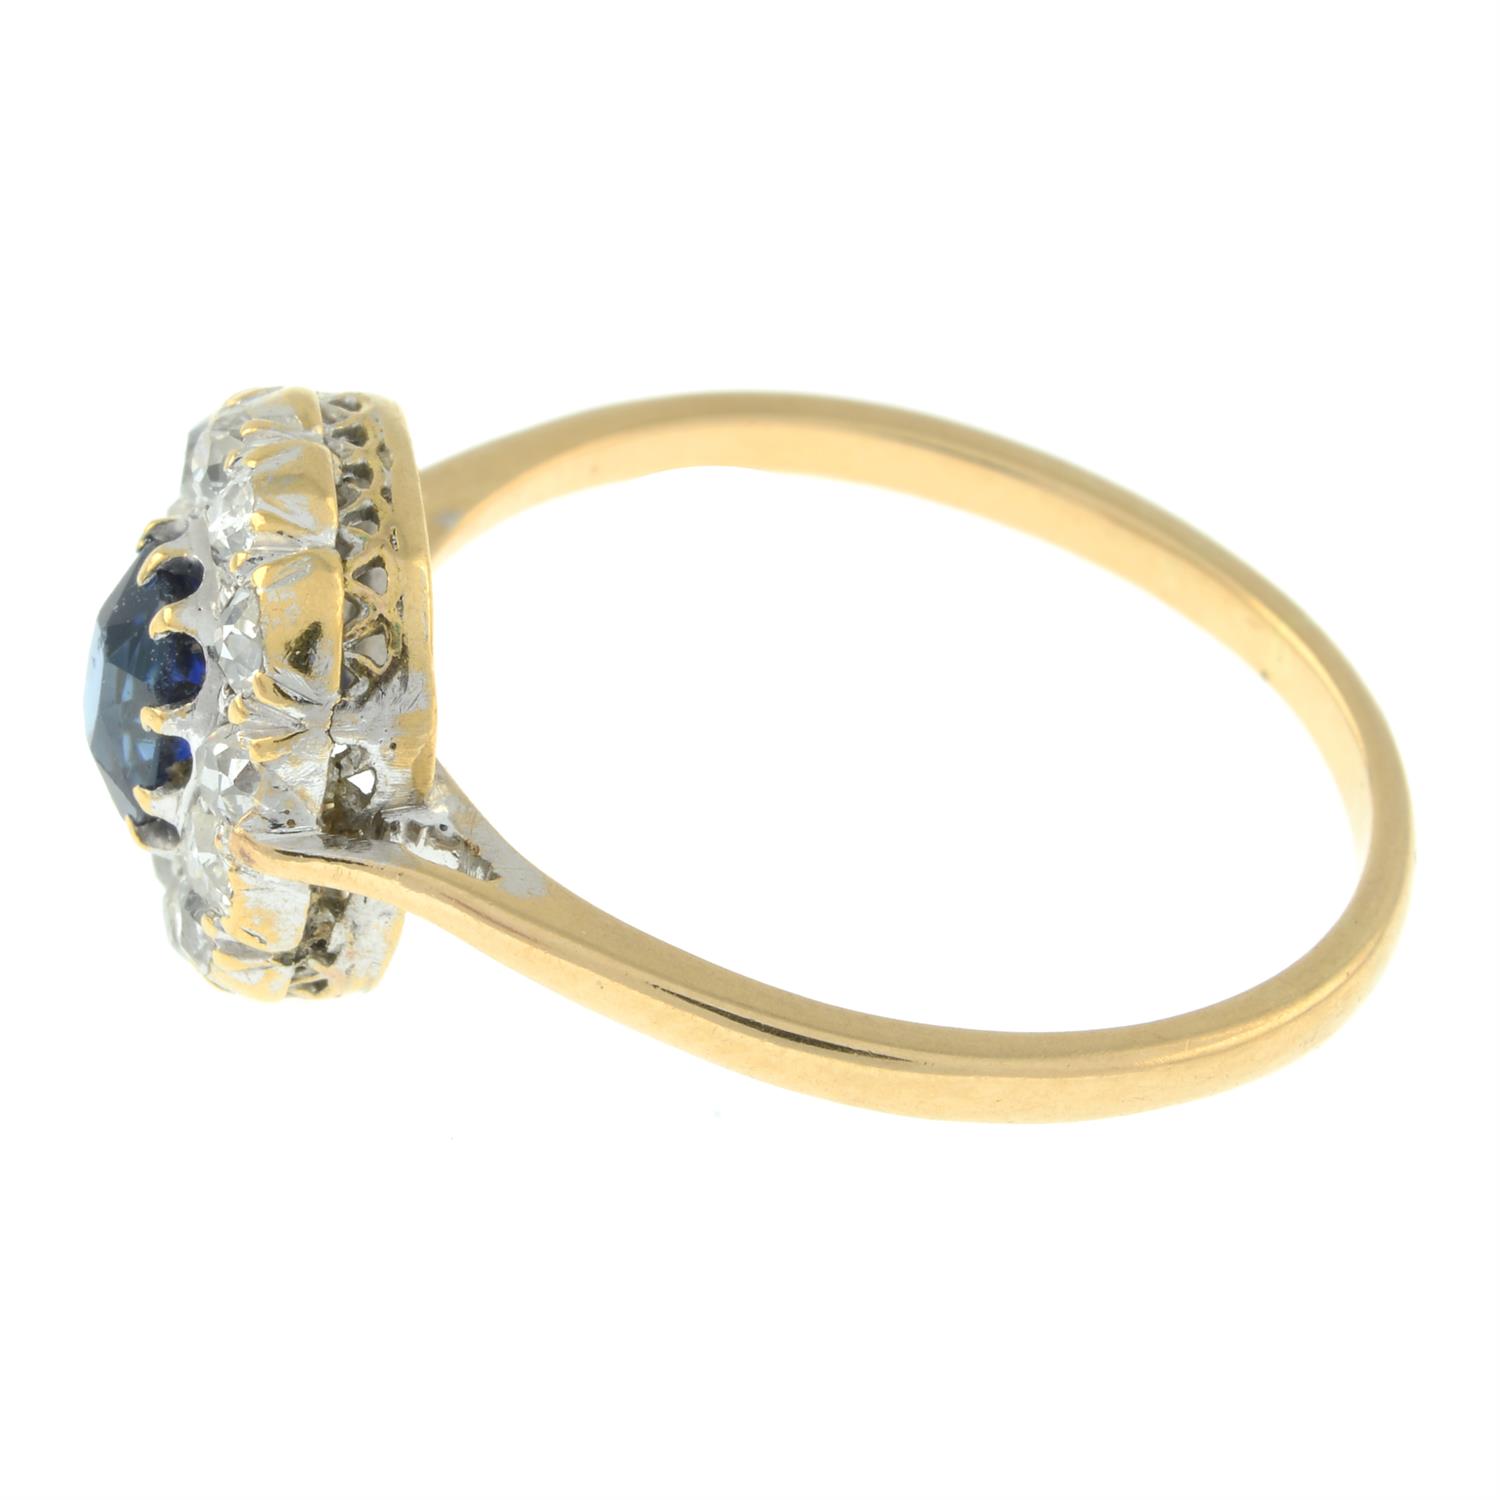 An early to mid 20th century 18ct gold sapphire and old-cut diamond cluster ring. - Image 4 of 5